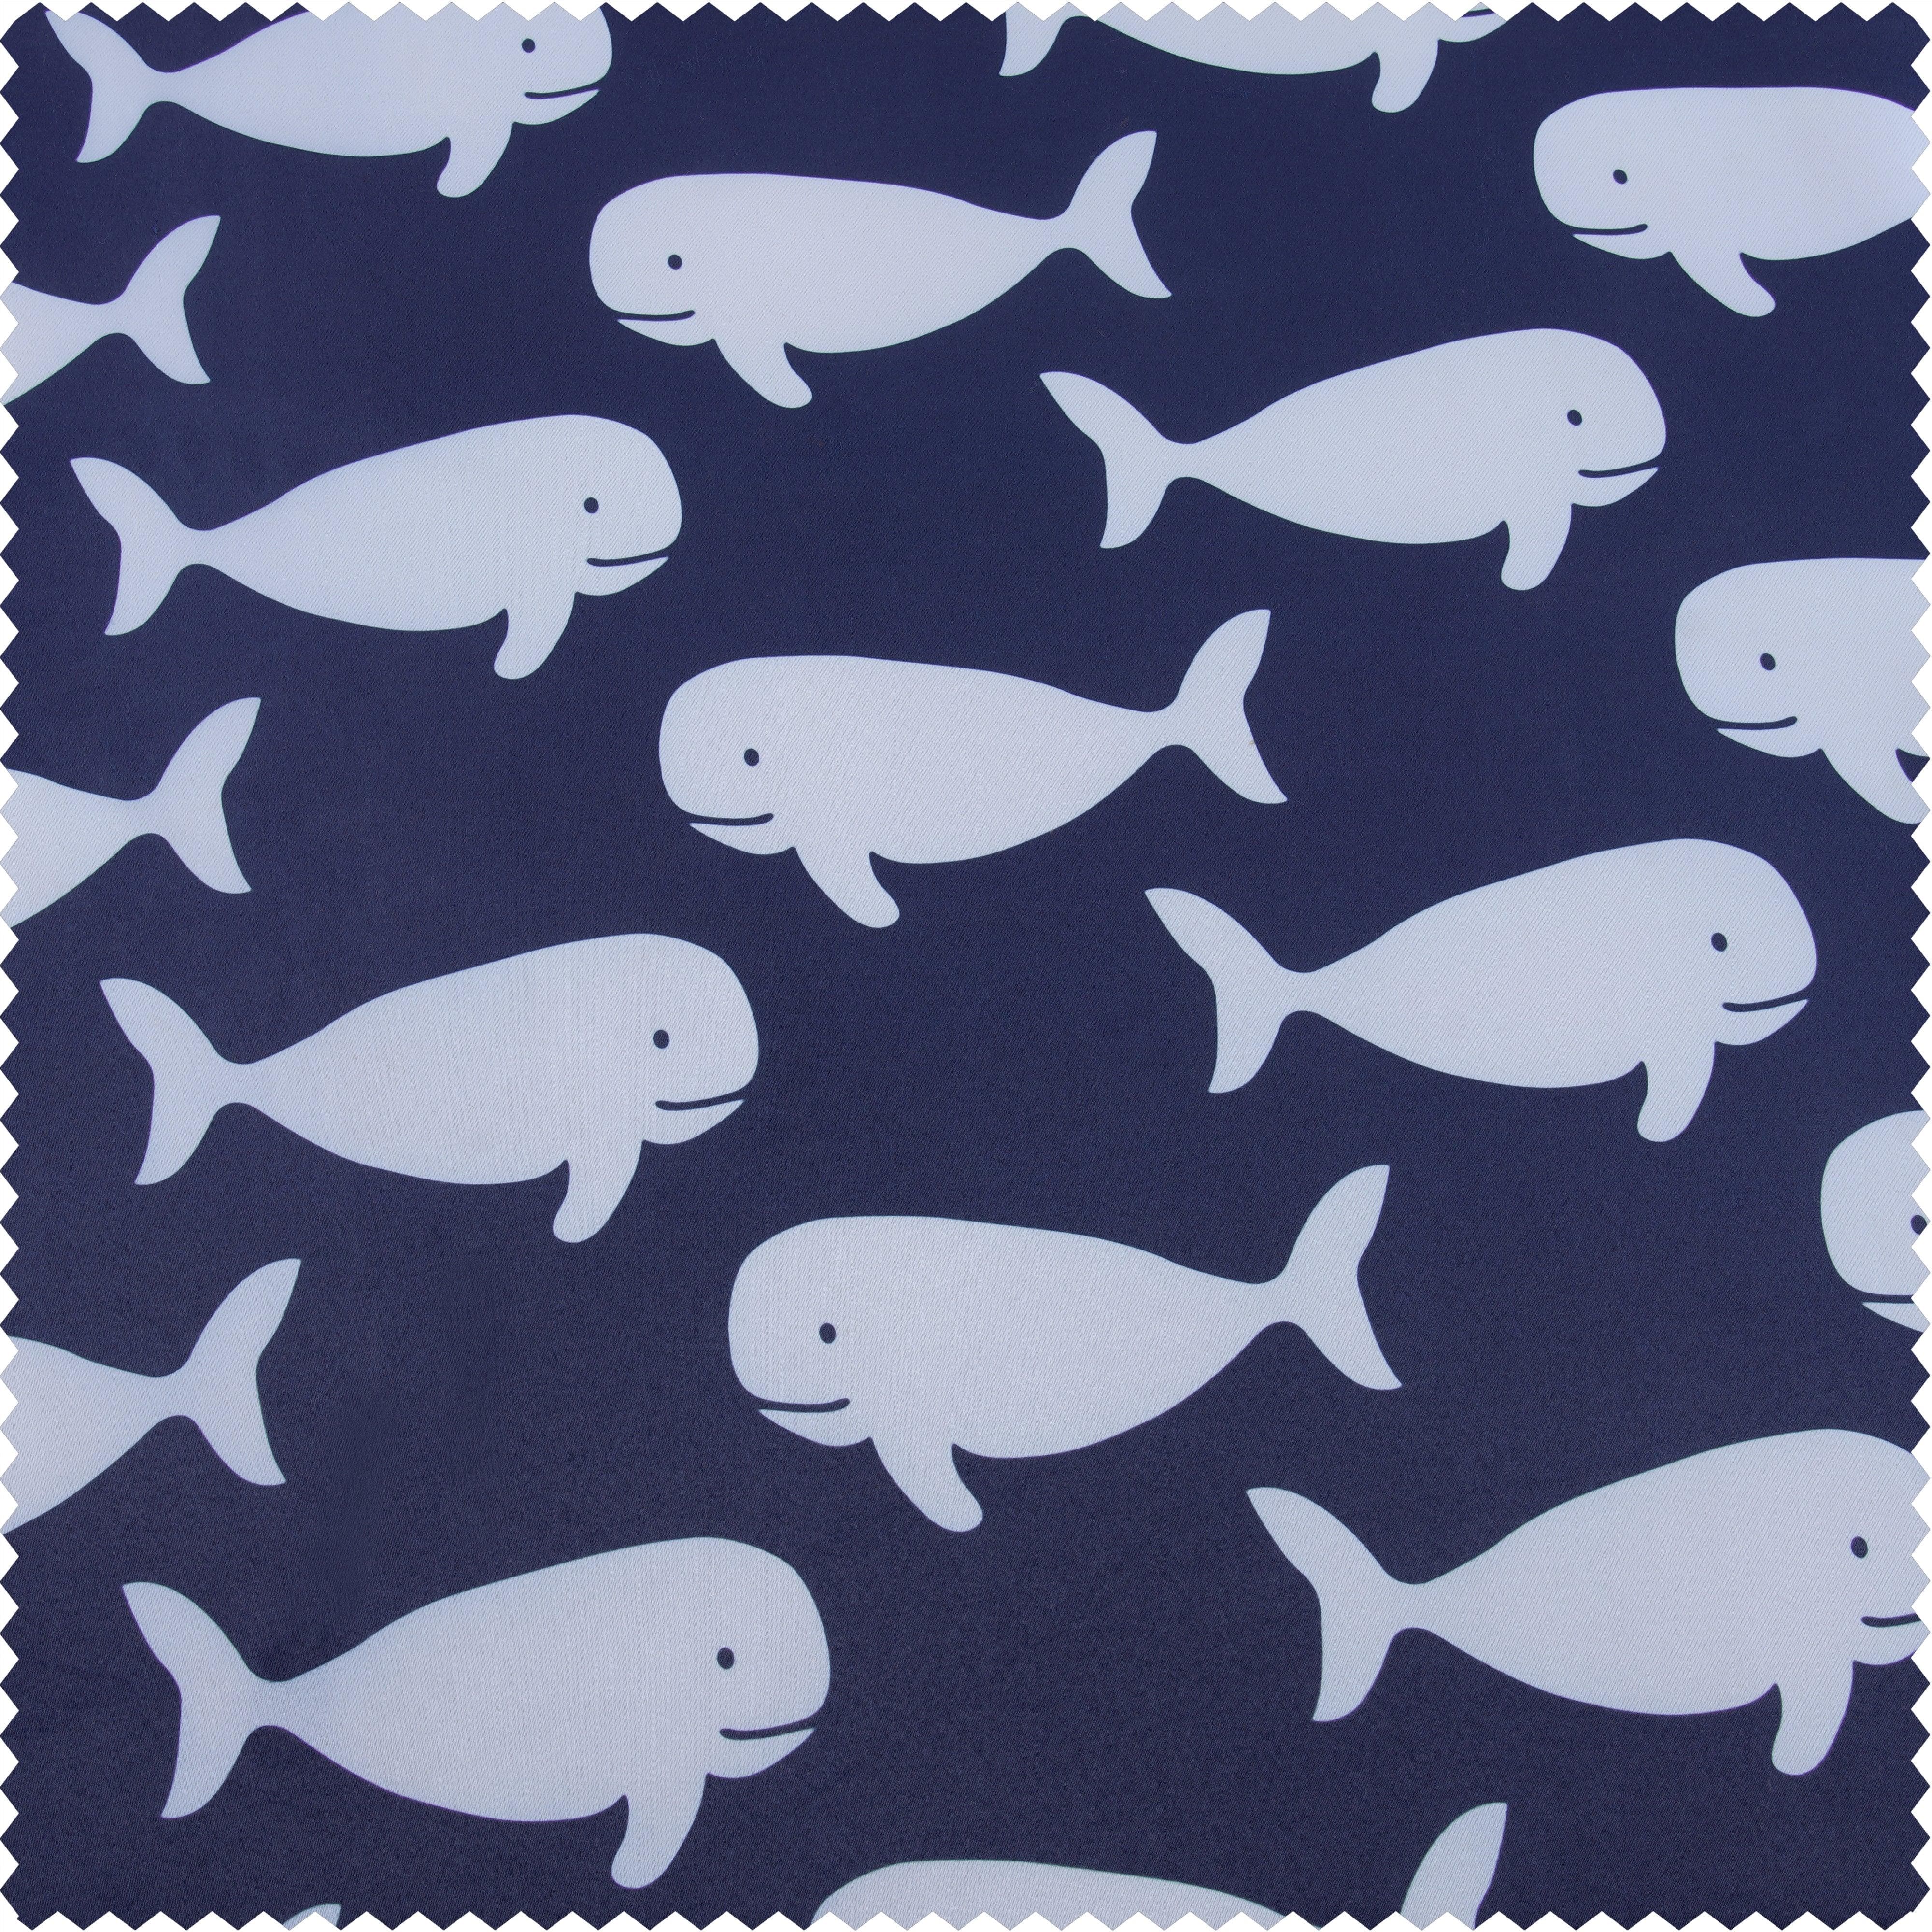 Migaloo Navy Printed Polyester Swatch